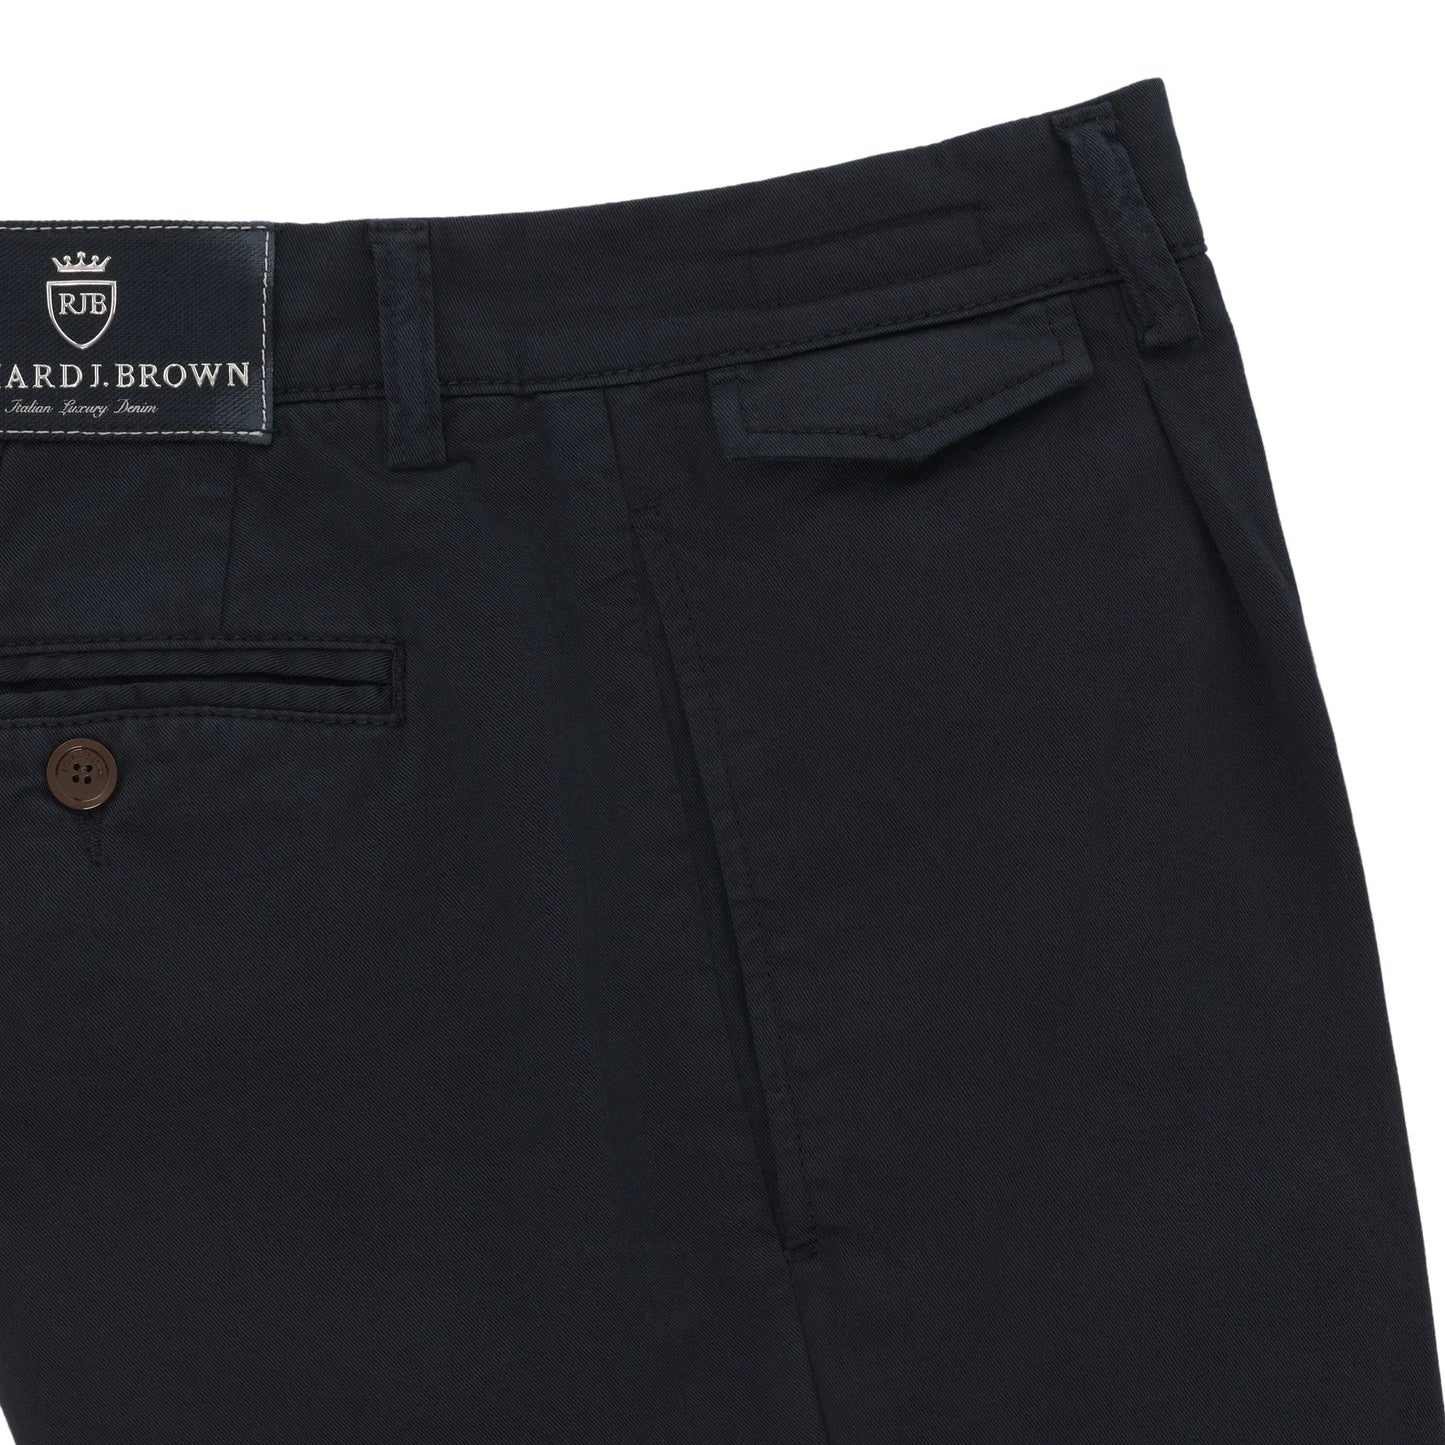 Regular-Fit Cotton Pleated Dark Blue Trousers